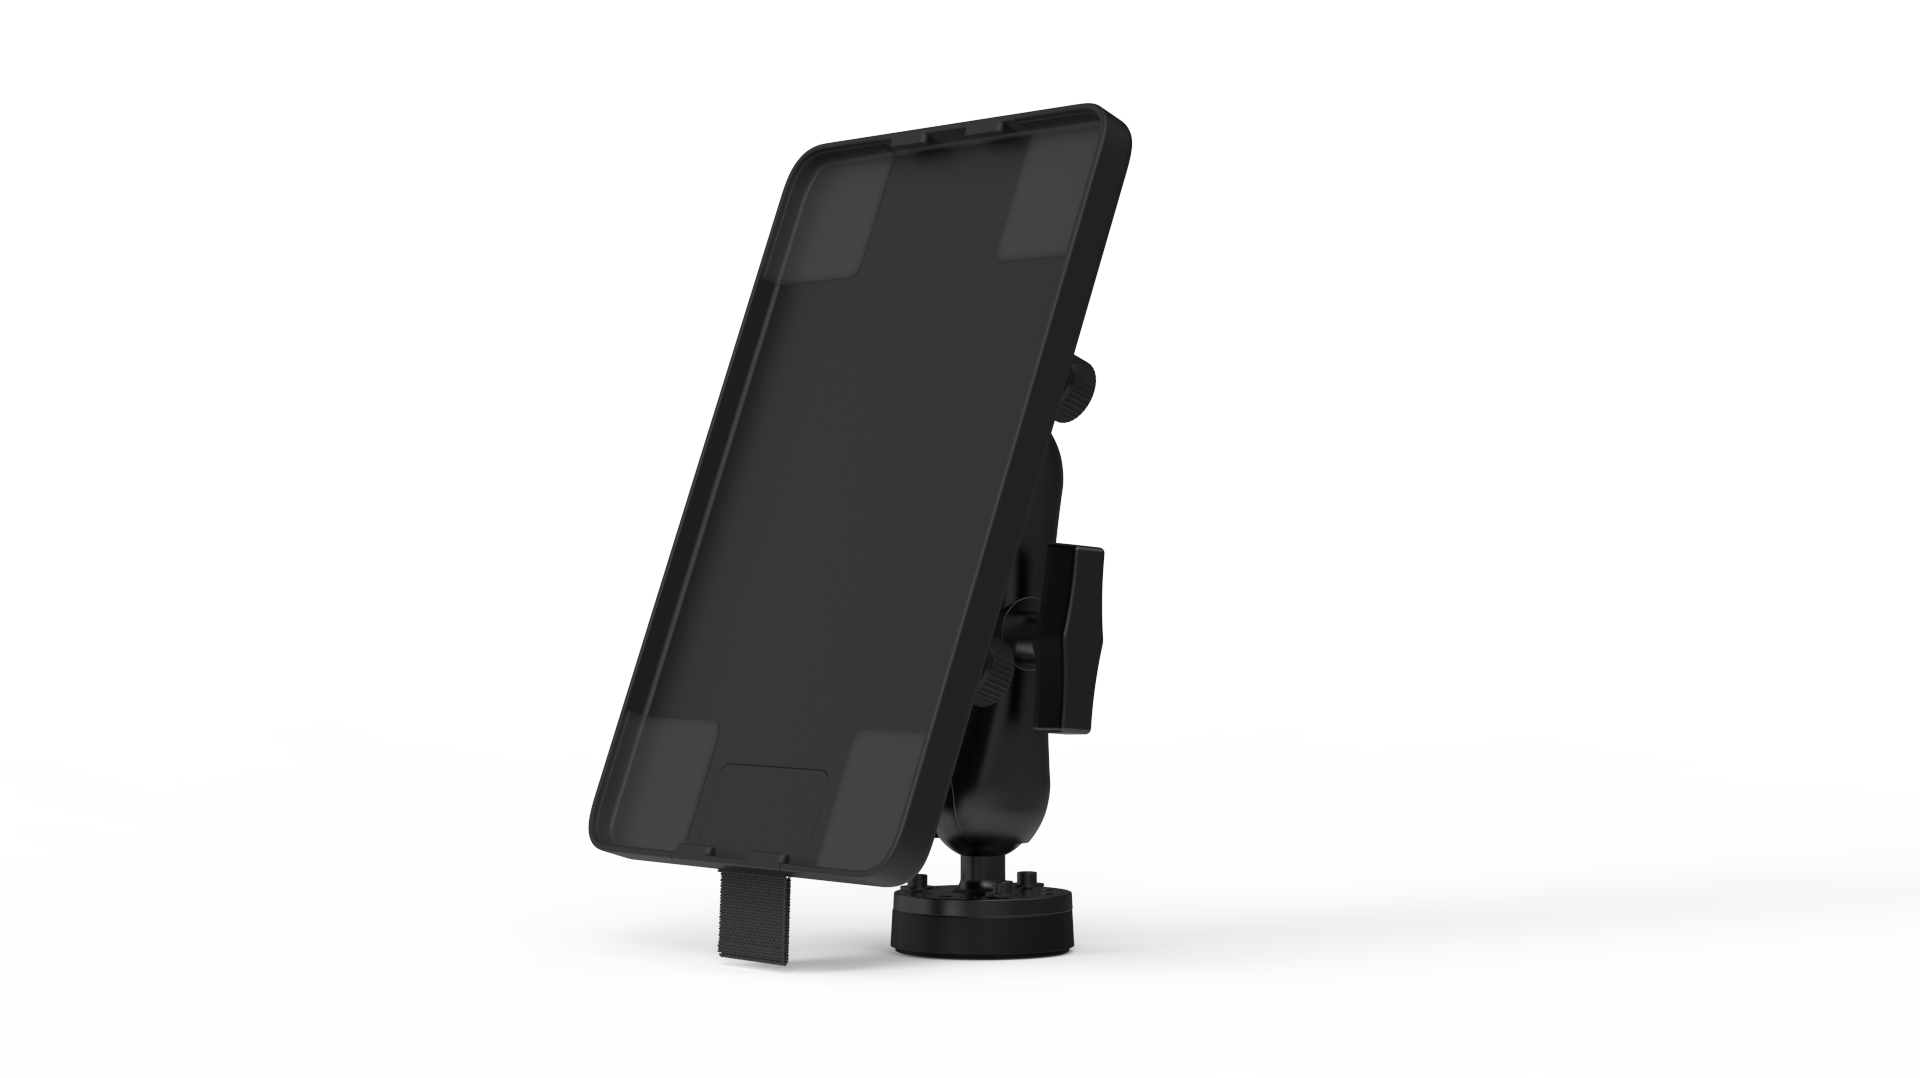 The Top Charging Mount. Adjust and rotate your mount with a small dashboard footprint.